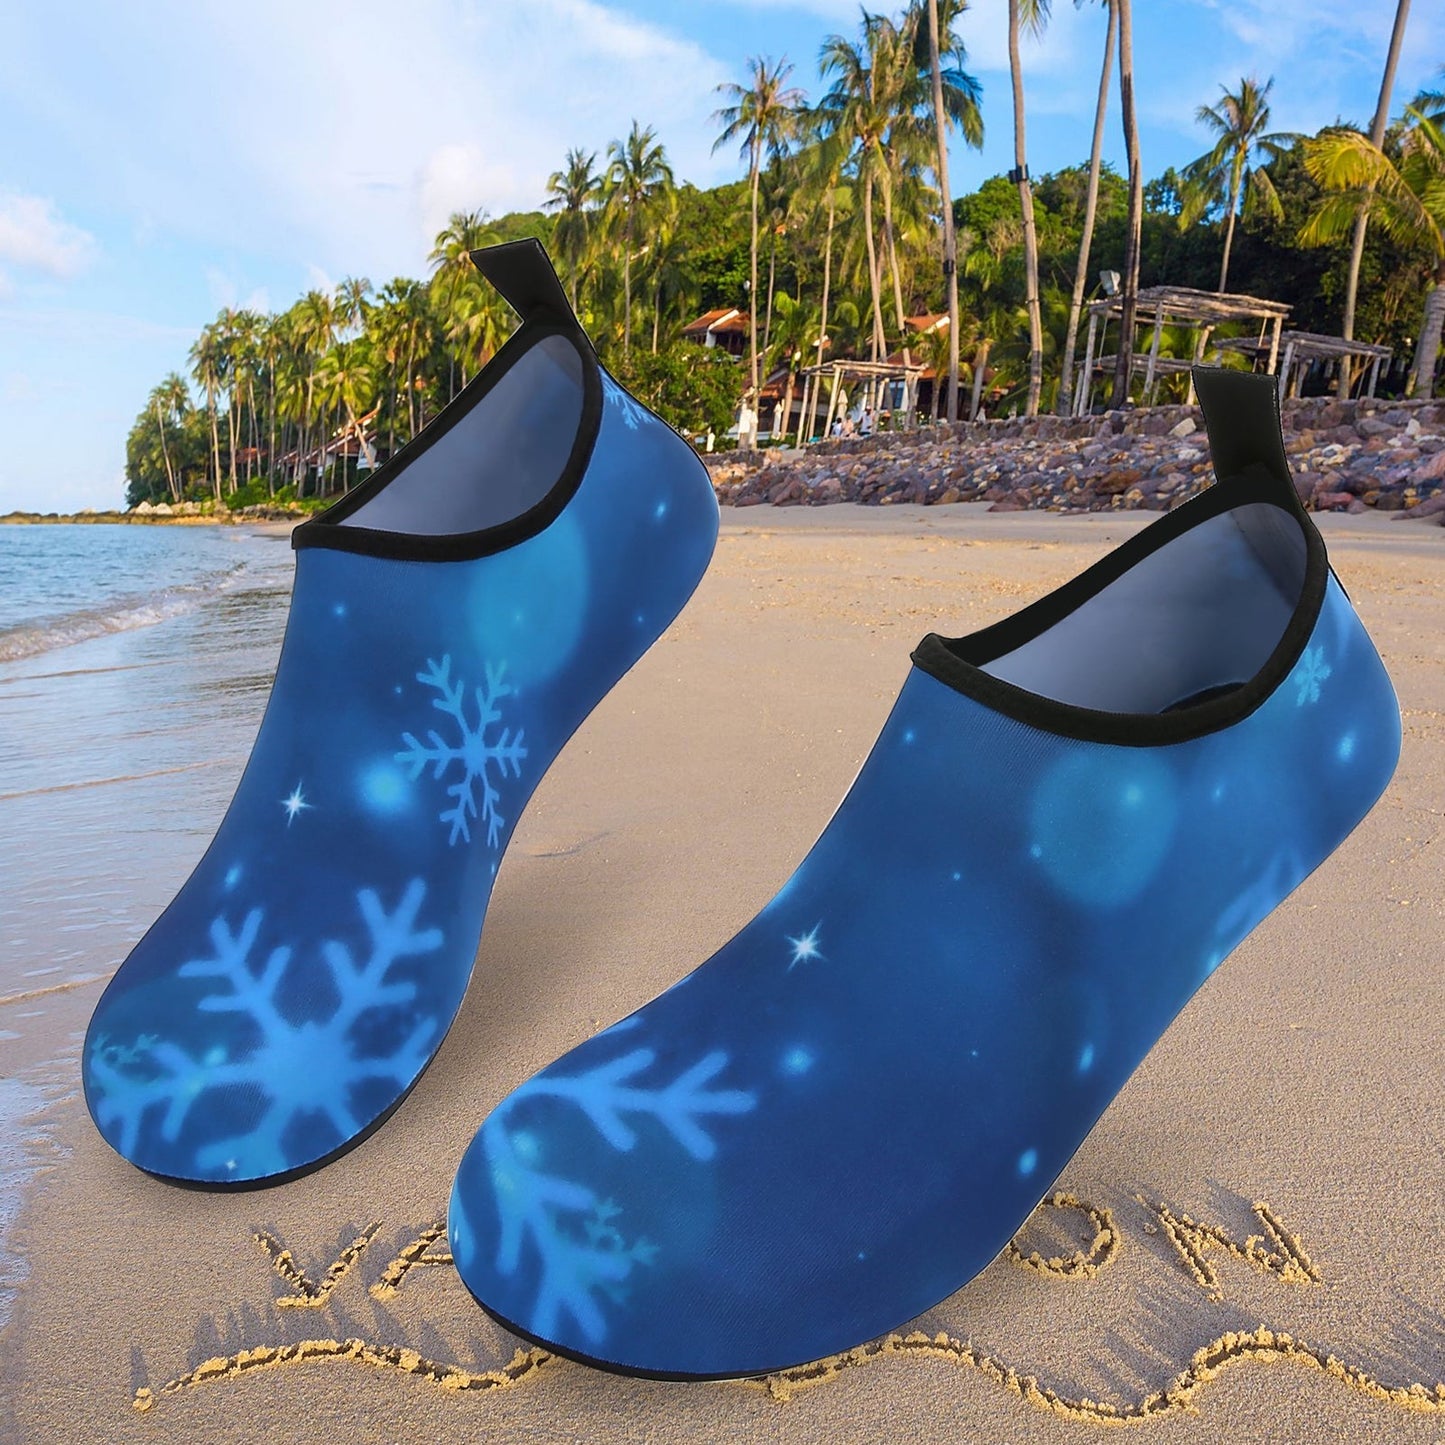 Men and Women a Slip On Barefoot Quick-Dry Beach Aqua Yoga Water Shoes (Snowflake/Blue)